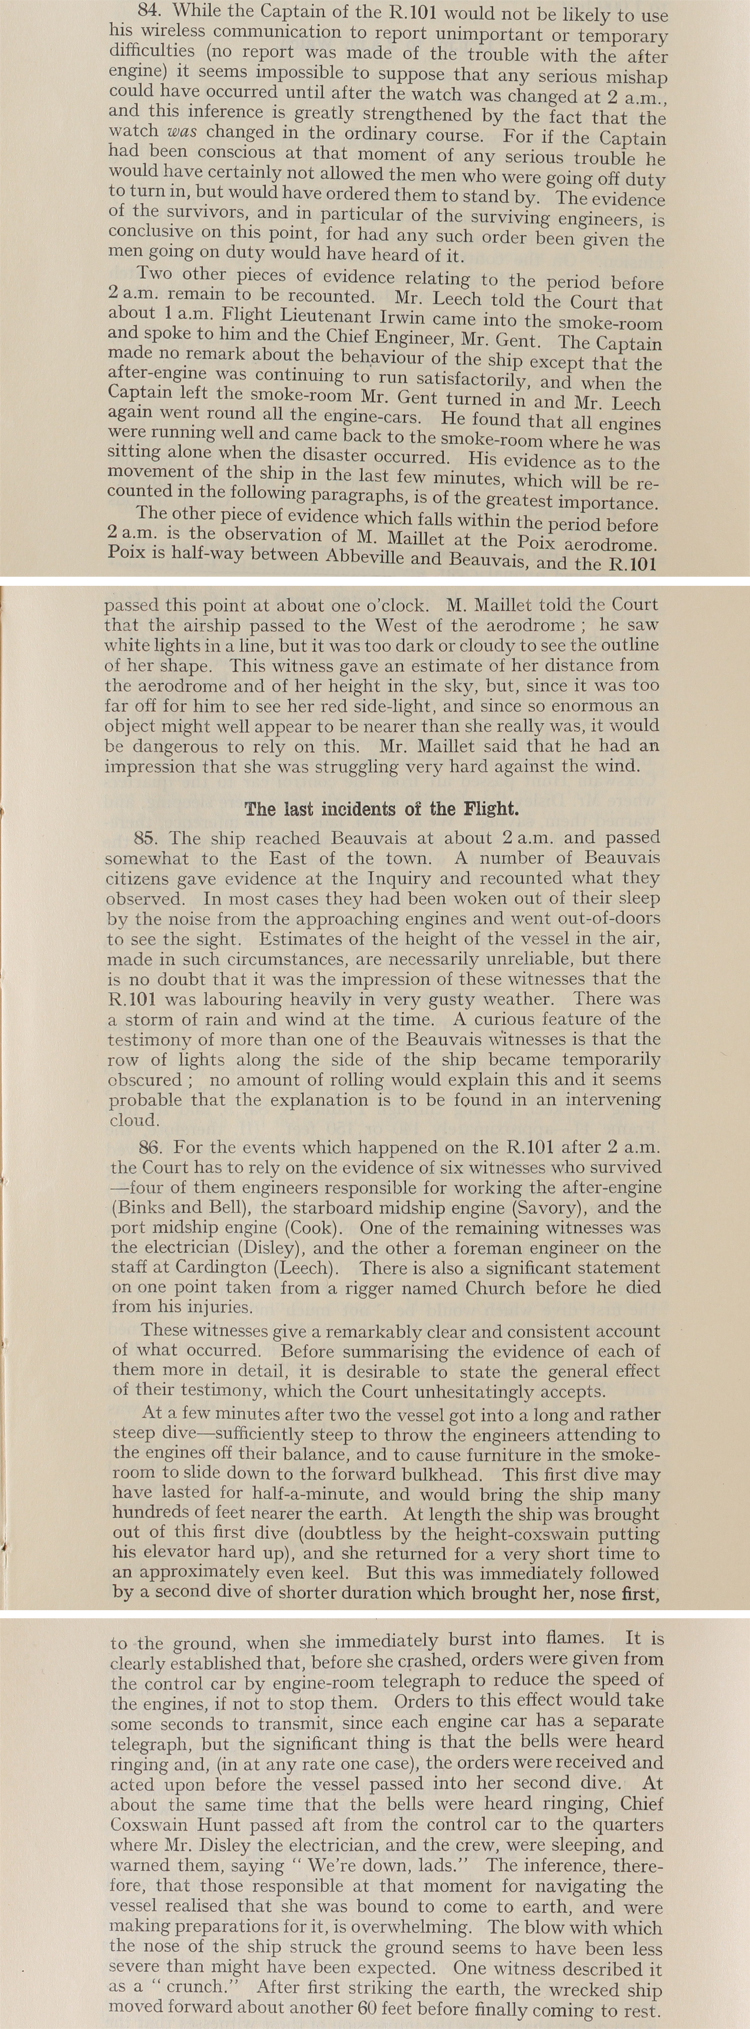 Extract from the Report of the R.101 Inquiry, March 1931 (AIR 5/920)